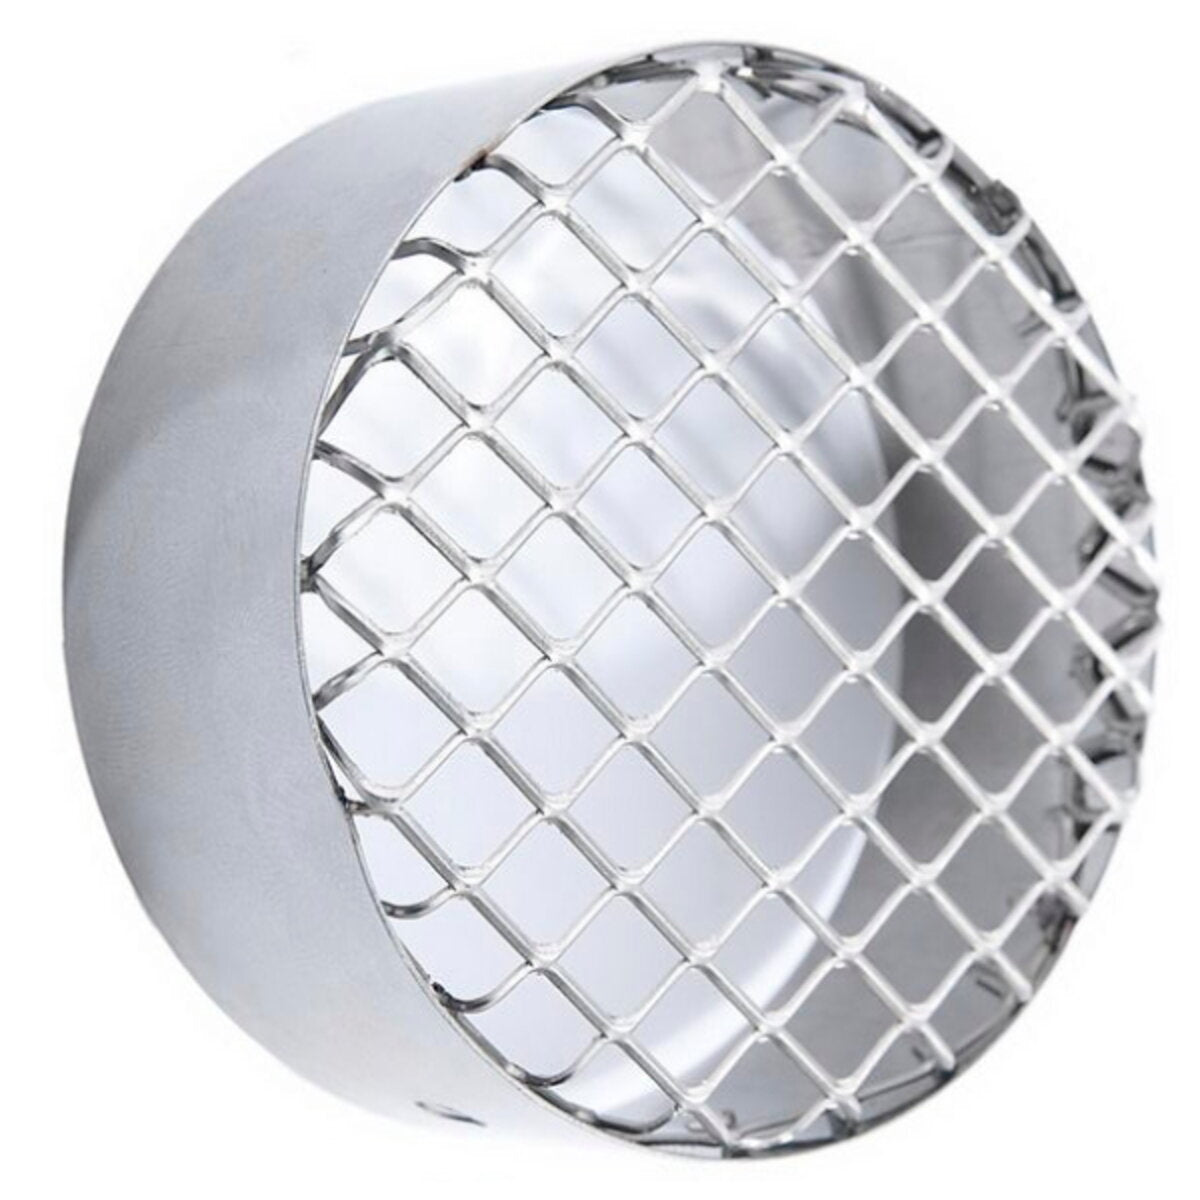 Anti-intrusion suction grille for condensing boiler fumes outlet diam. 80mm. stainless